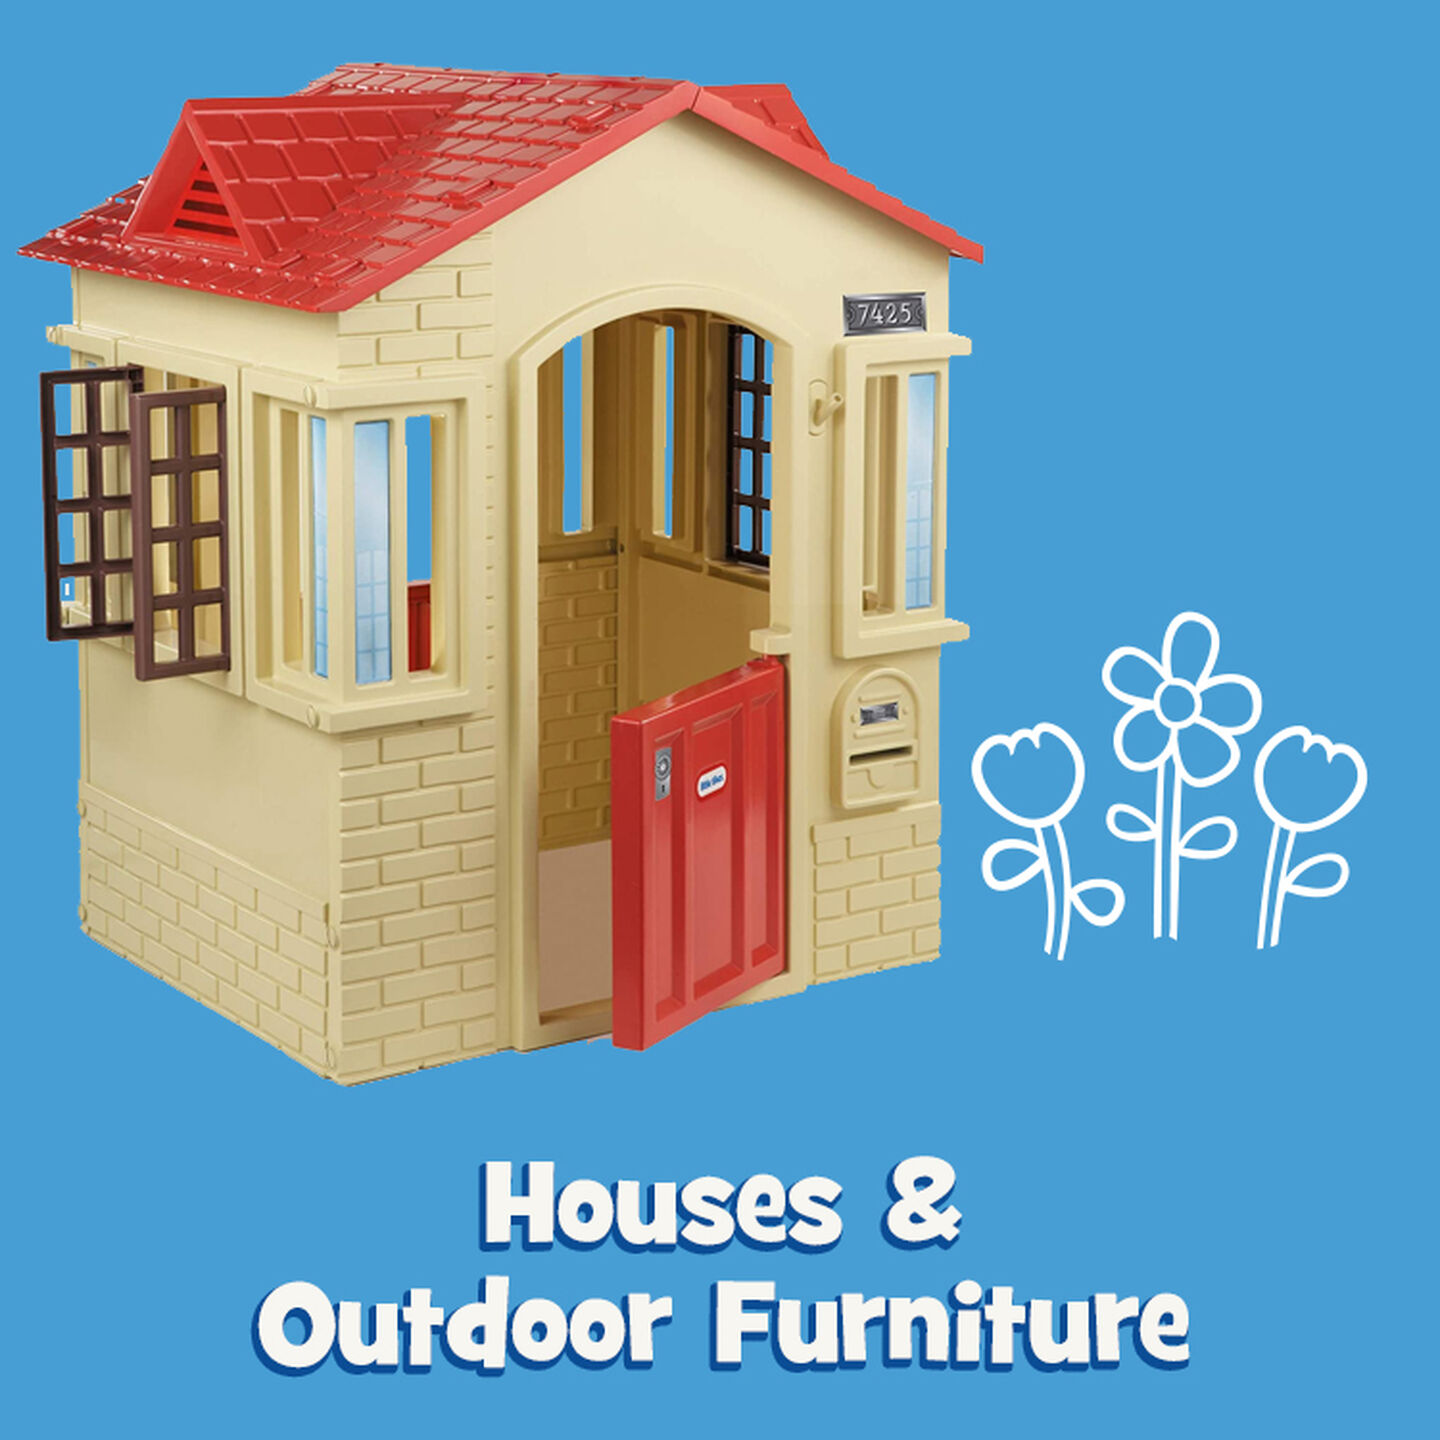 Houses & Outdoor Furniture